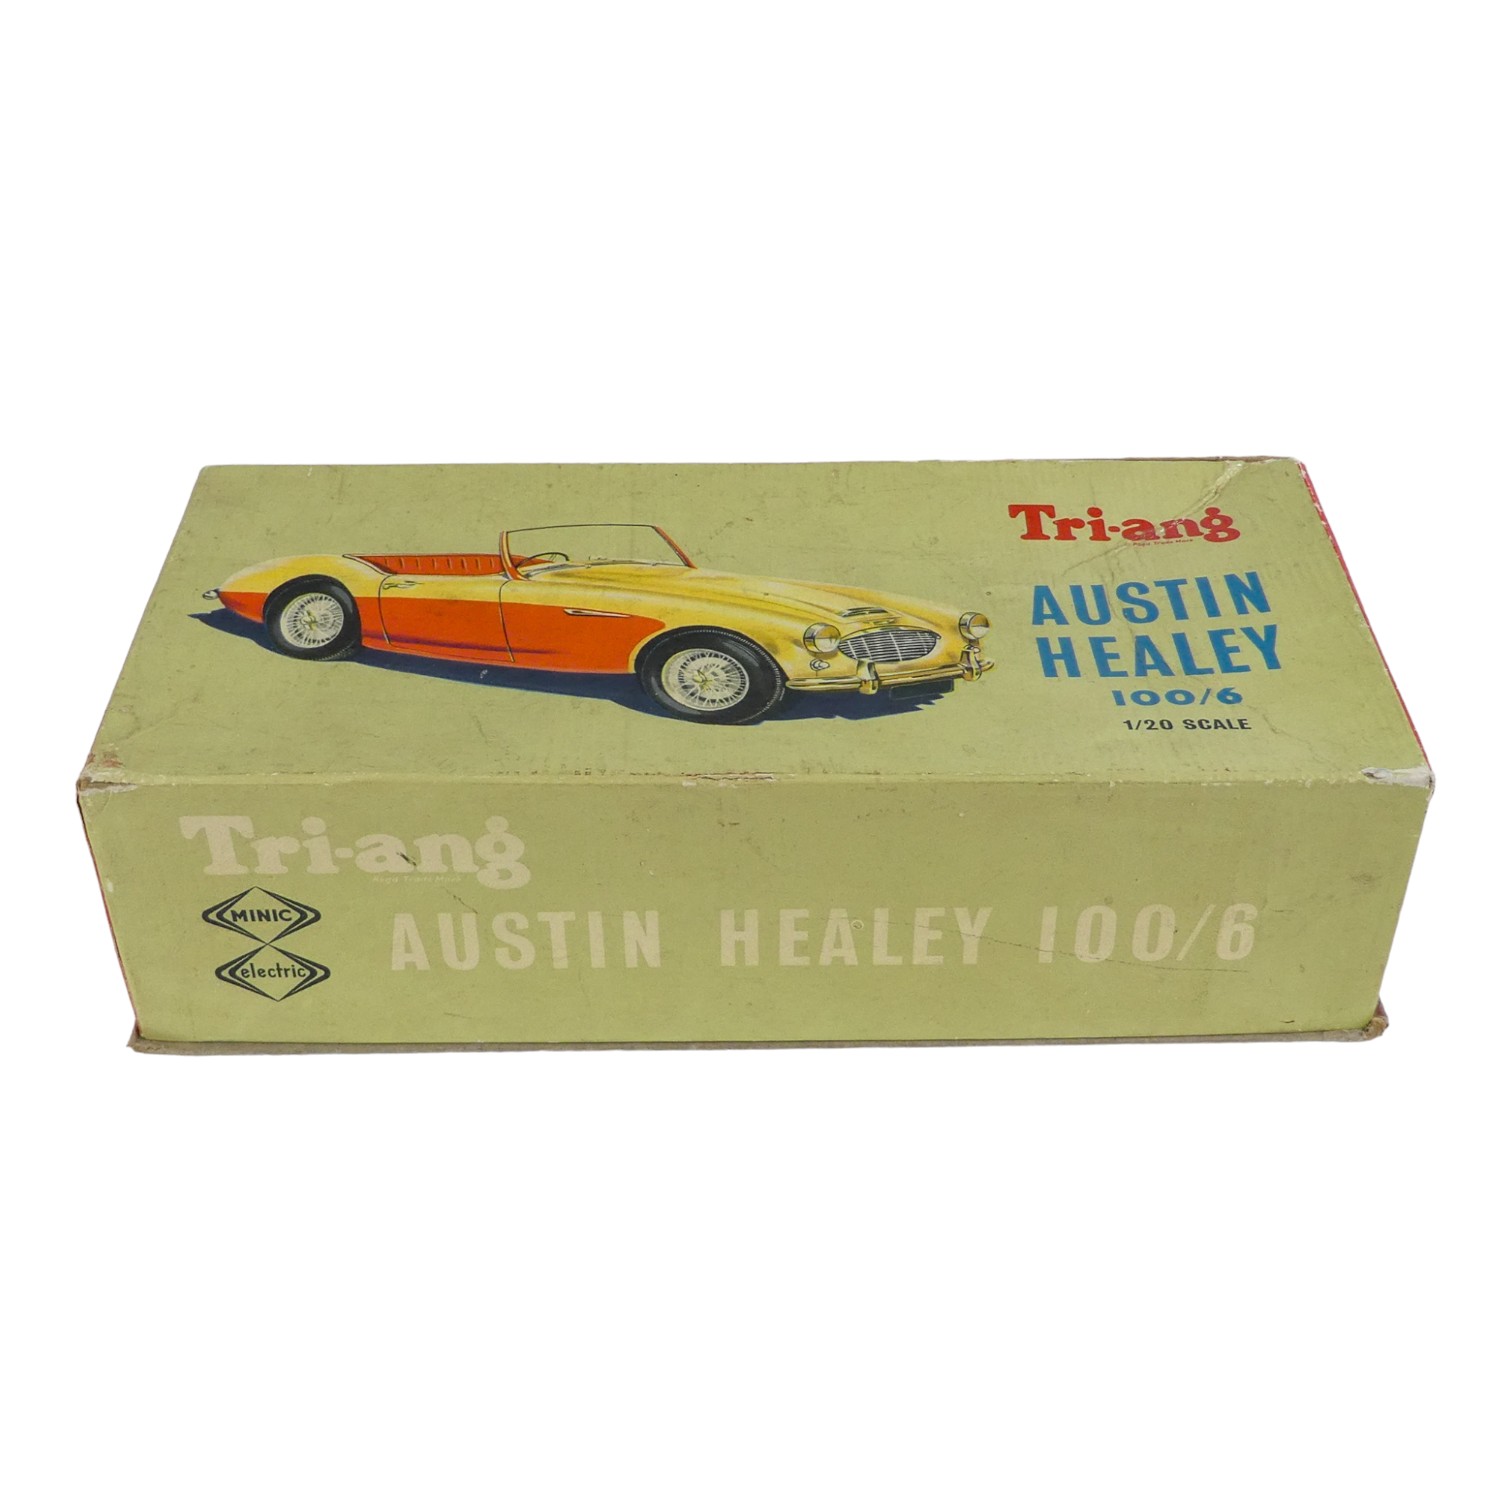 Triang No. M002 - 1/20 Battery Operated Austin Healey 100/6, 1/20 scale, with red bodywork and - Image 6 of 6